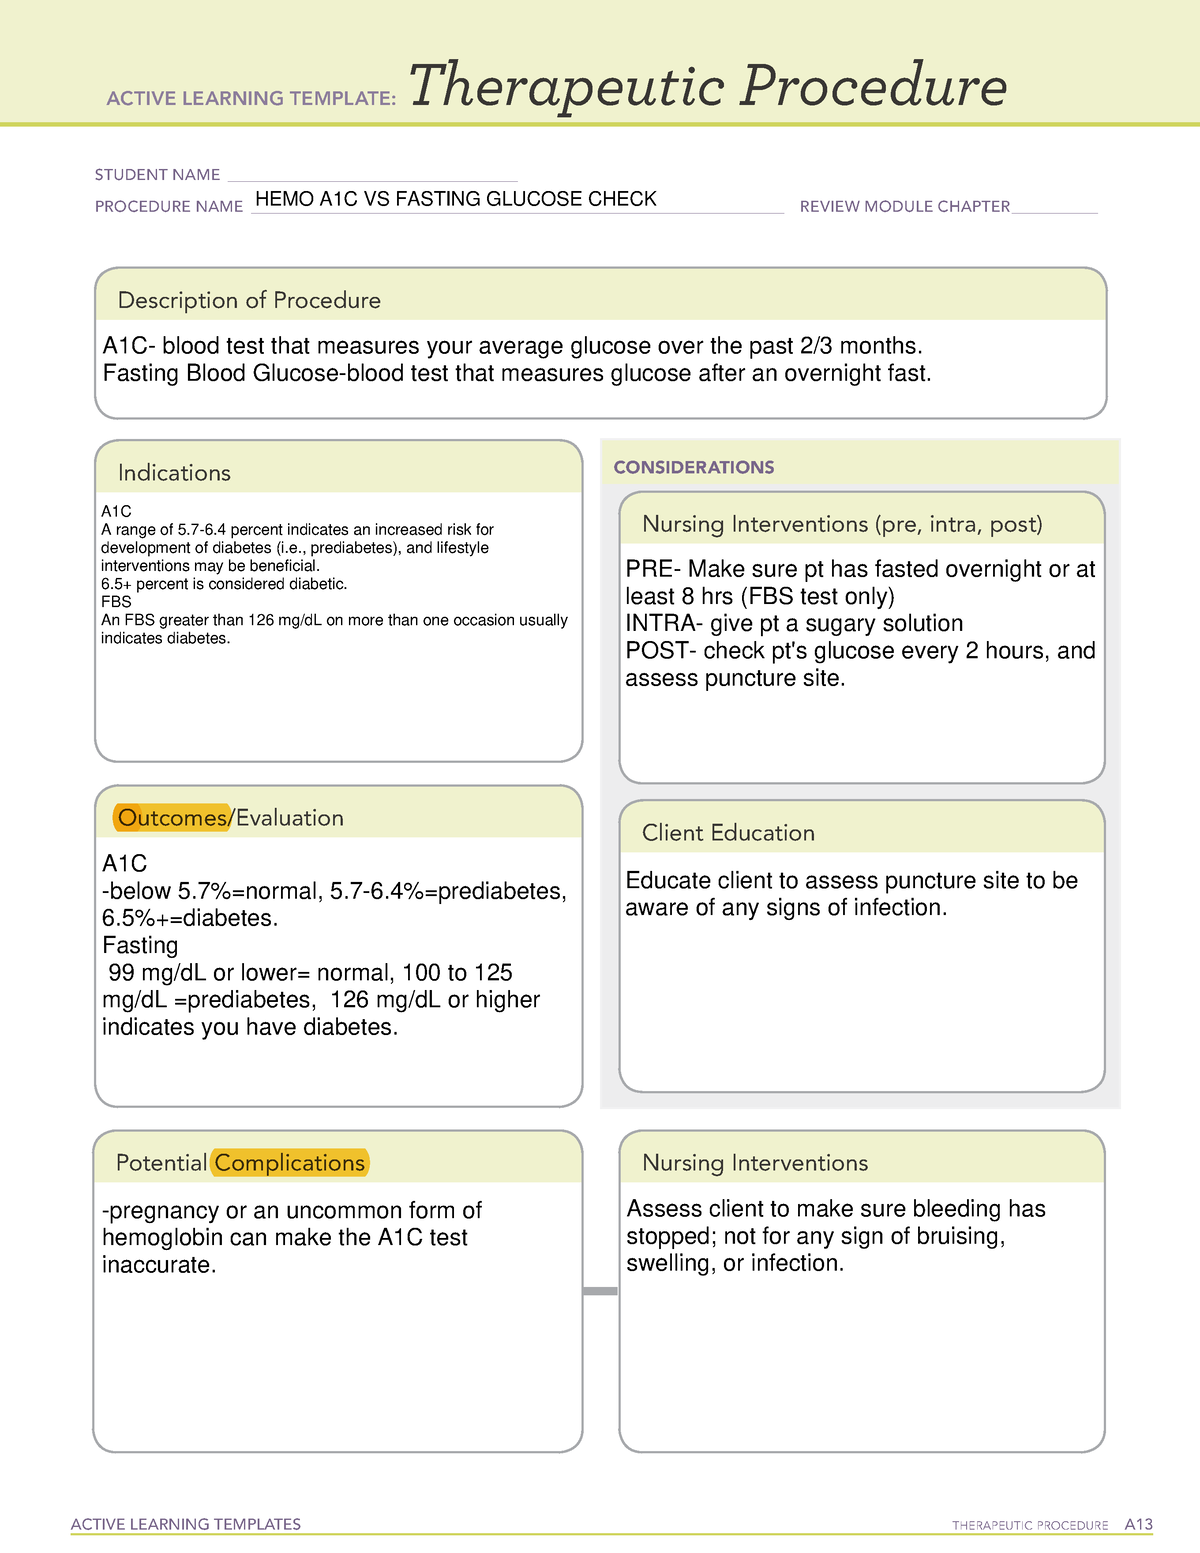 fasting-glucose-check-ati-template-active-learning-templates